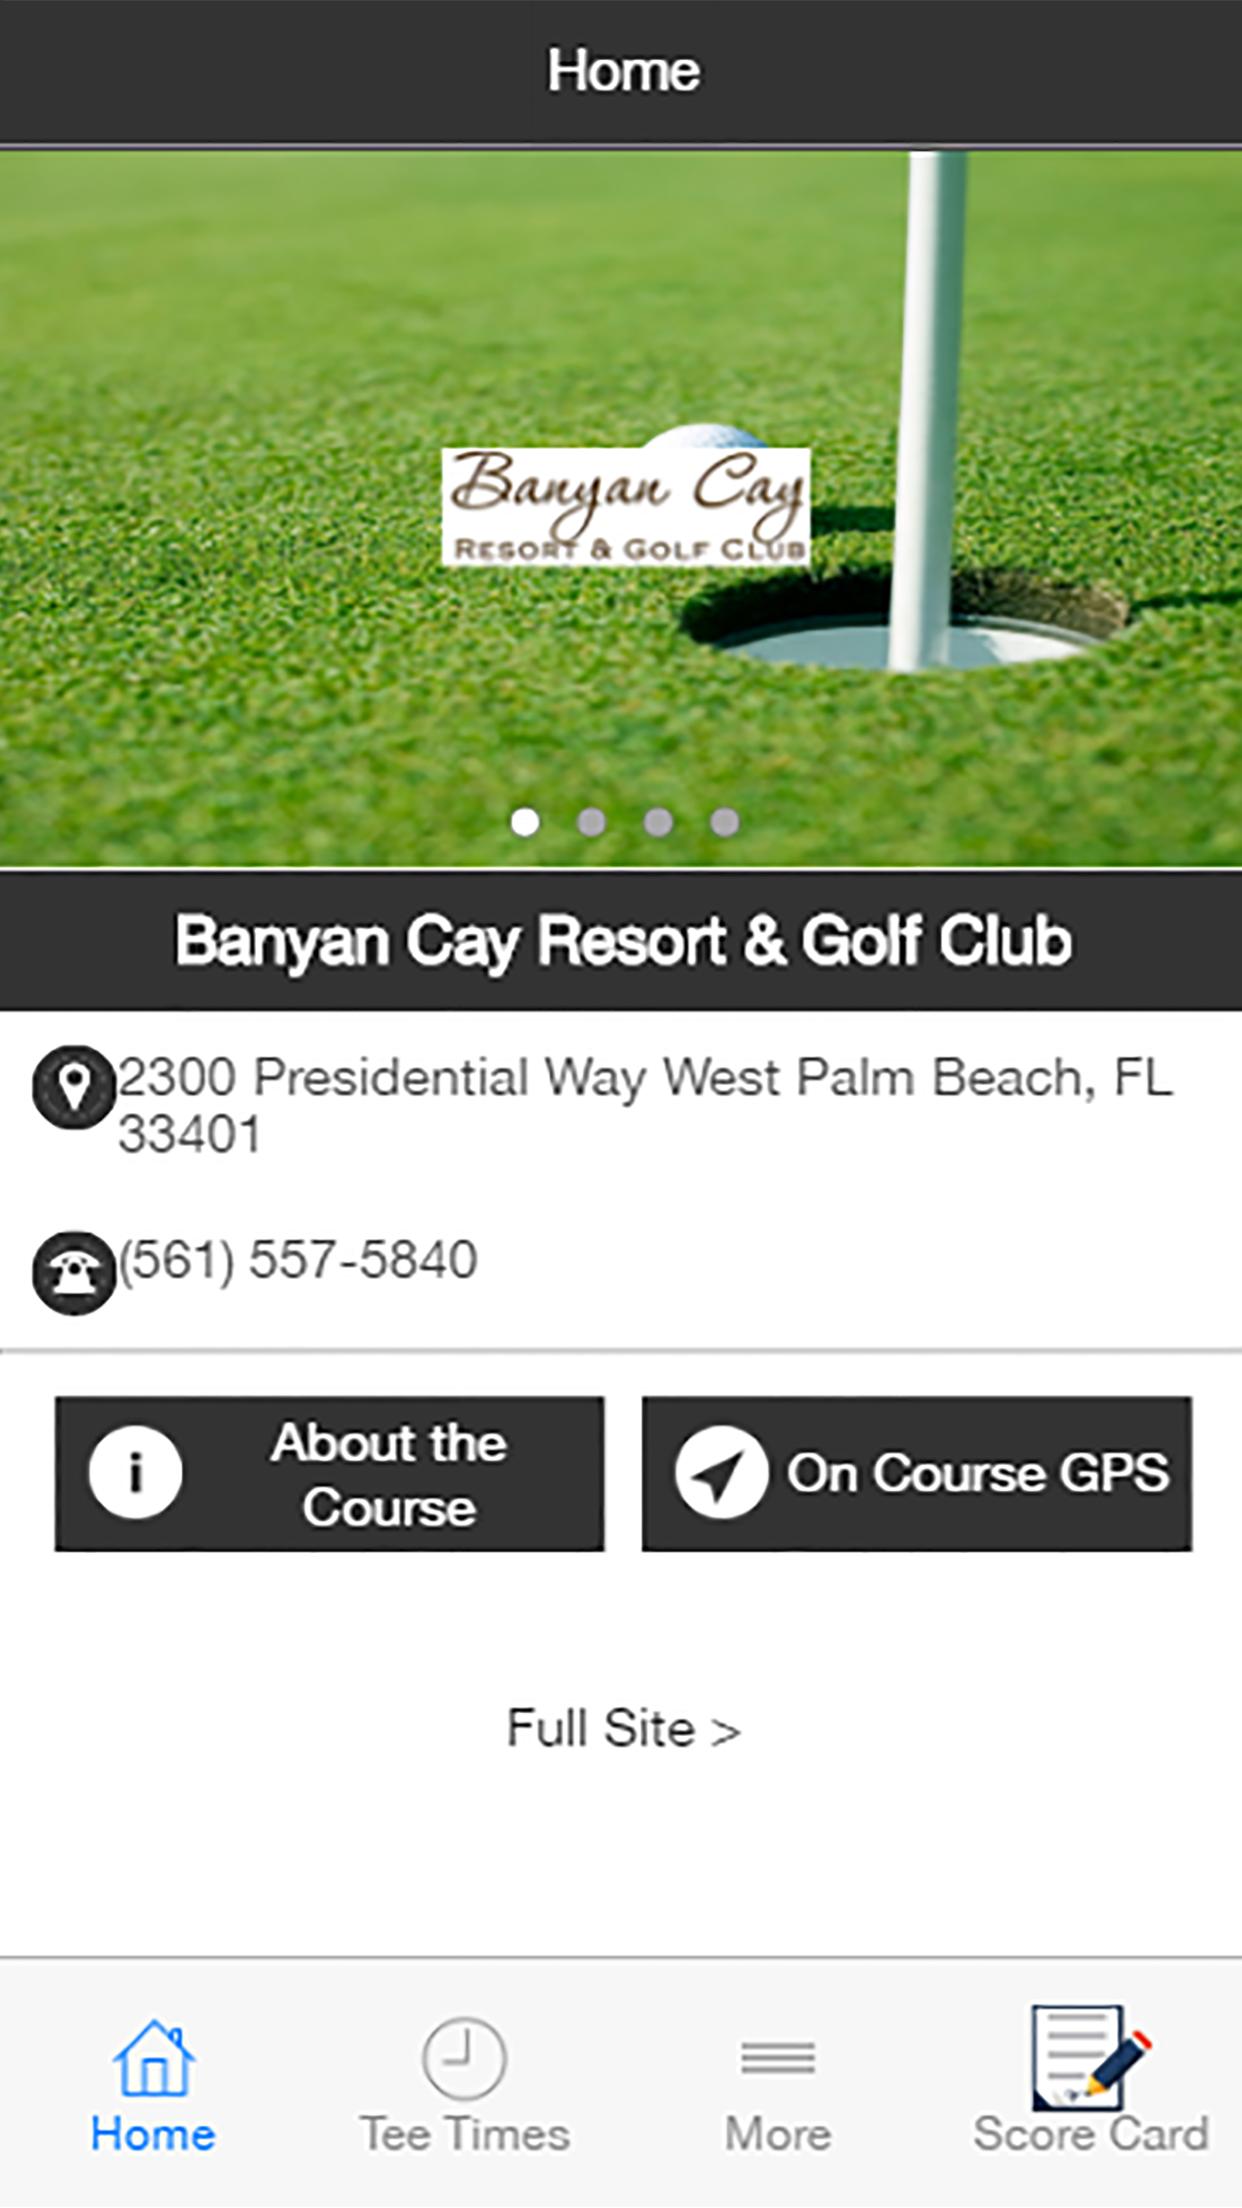 Banyan Cay Resort & Golf Club for Android - APK Download